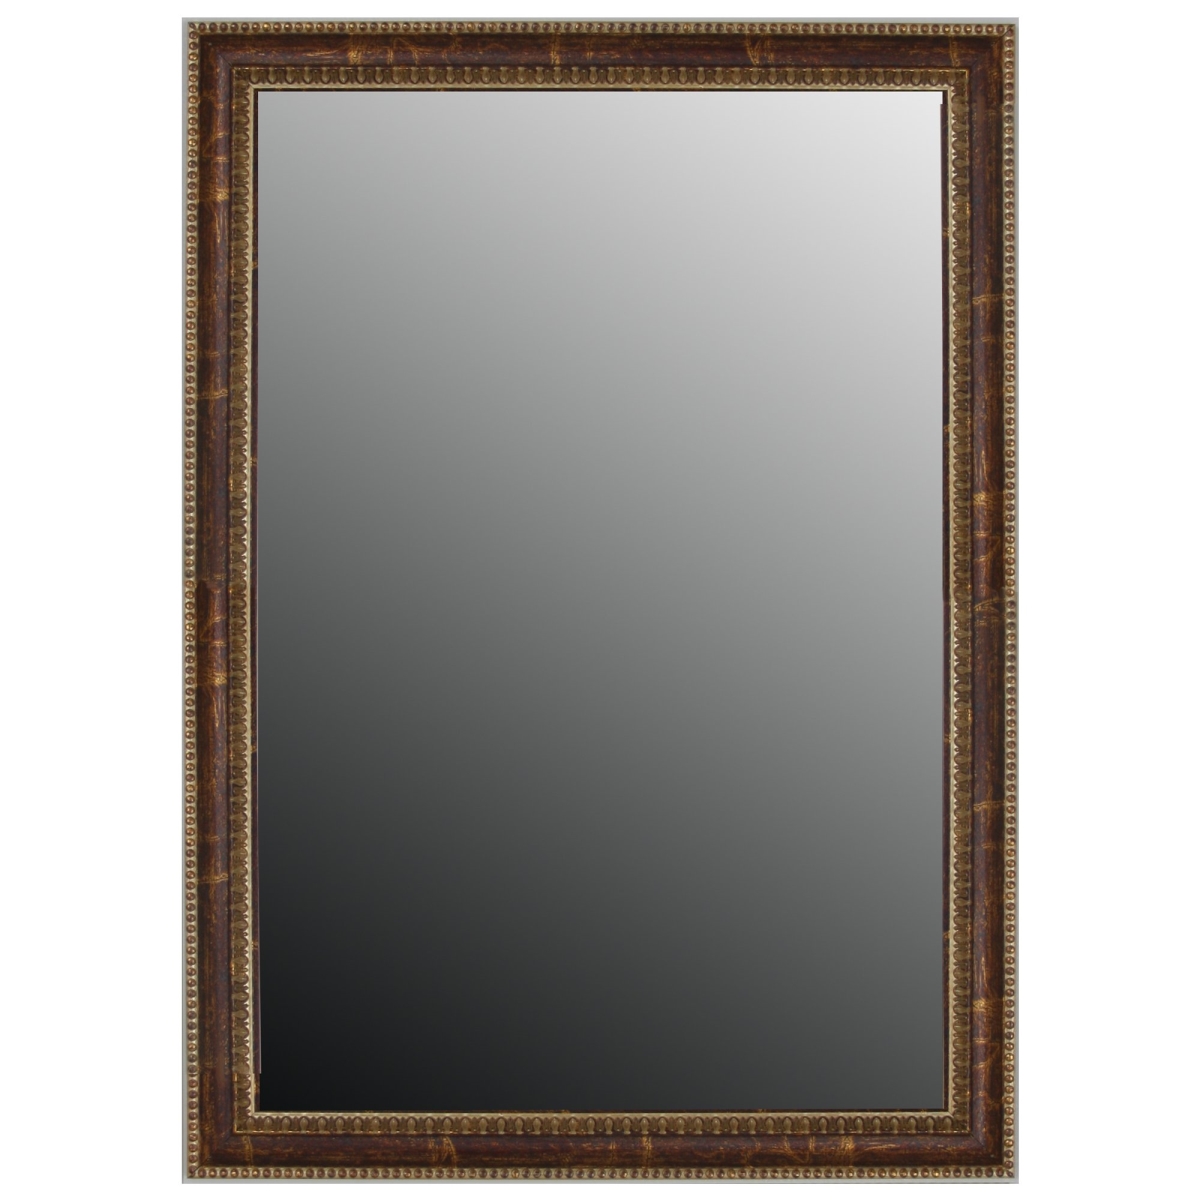 Hitchcock Butterfield 8088000 Gold Georgian V Beaded Wall Mirror - 16.25 X 34.25 In.